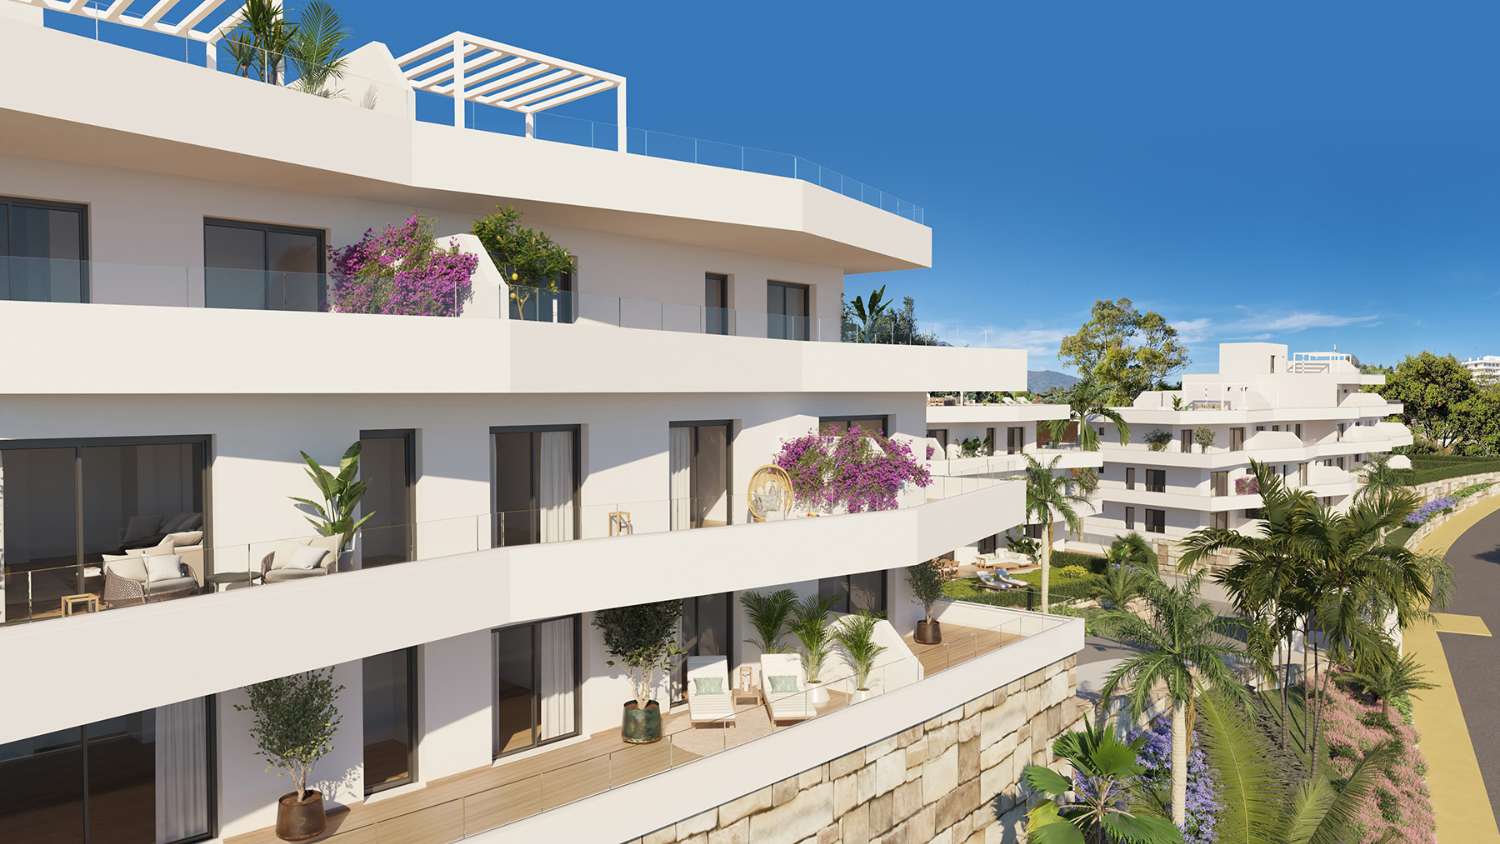 Apartment 5 minutes from the beach with two bedrooms next to the sea with private garden